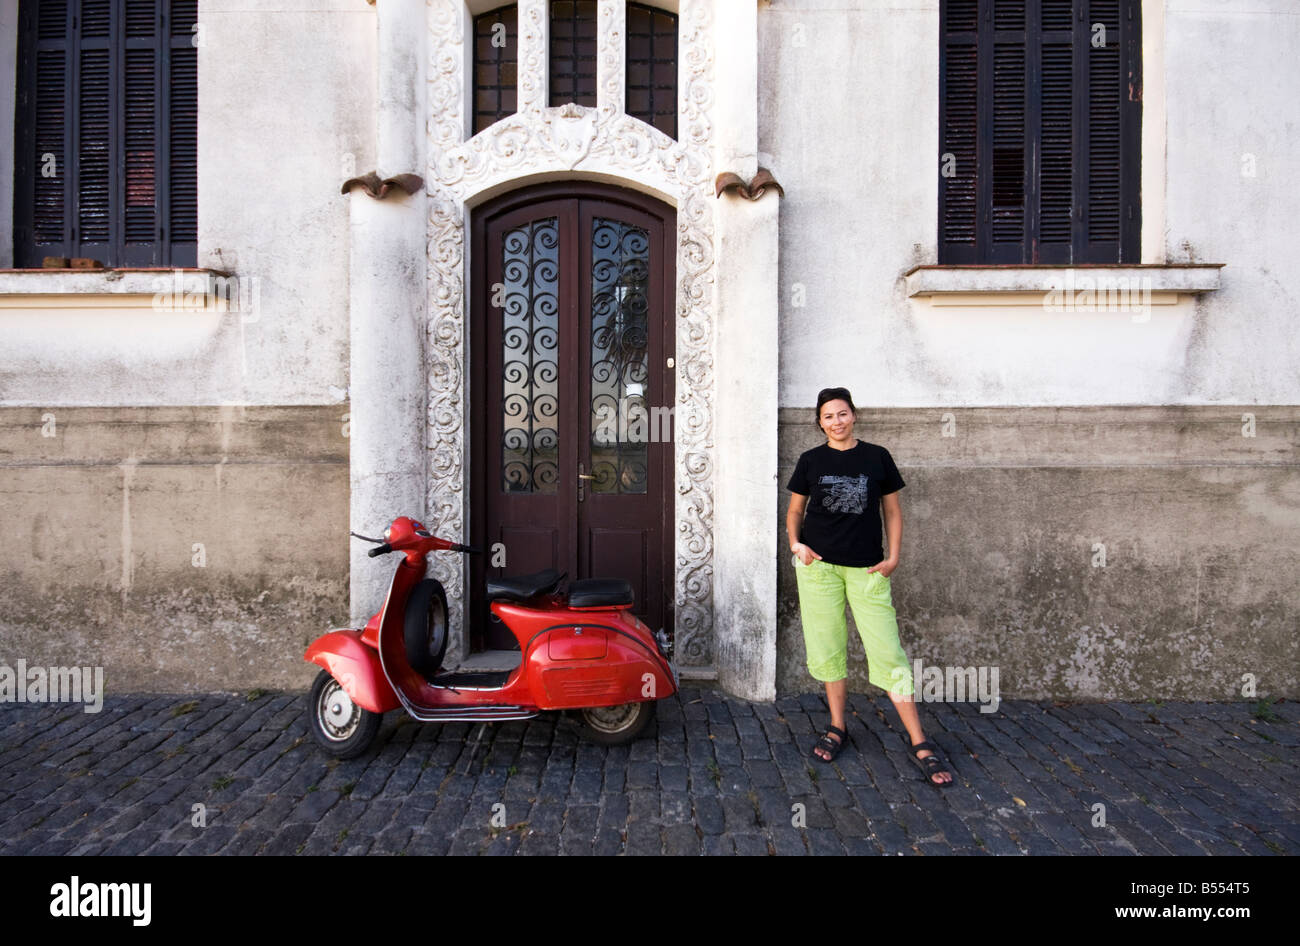 A young woman poses for a photo next to a red vespa in Colonia del Sacramento Uruguay Stock Photo